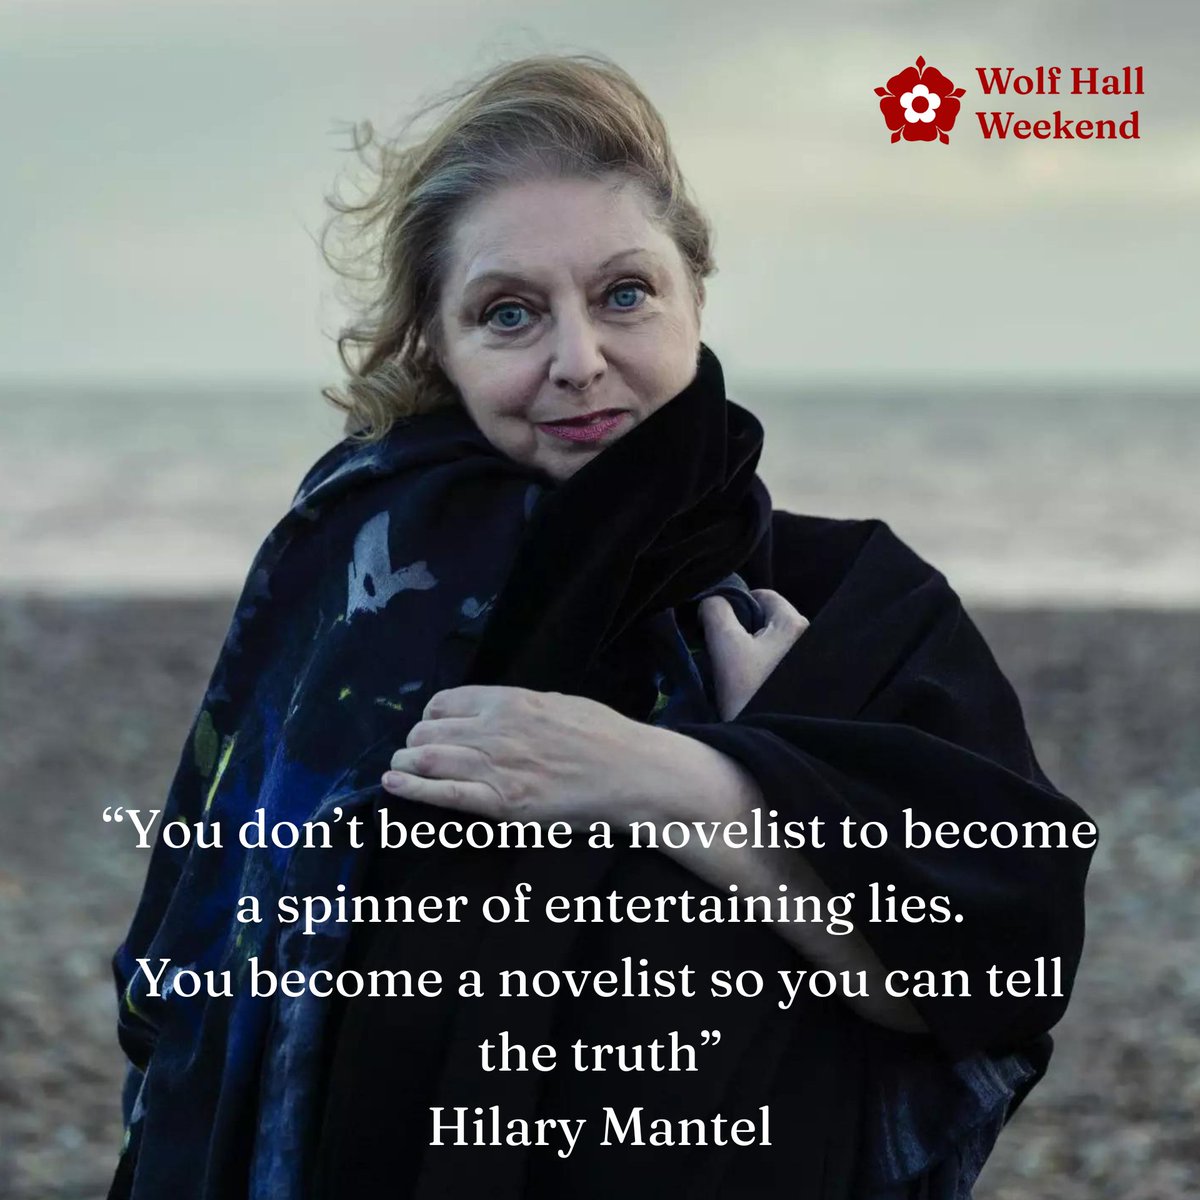 ‘‘You don’t become a novelist to become a spinner of entertaining lies.
You become a novelist so you can tell the truth”
Hilary Mantel wolfhallweekend.com

#Exeter #hilarymantel #Books #Devon #WolfHallWeekend #Tudor #History #Events #Quotes #bookstagram #writerscommunity